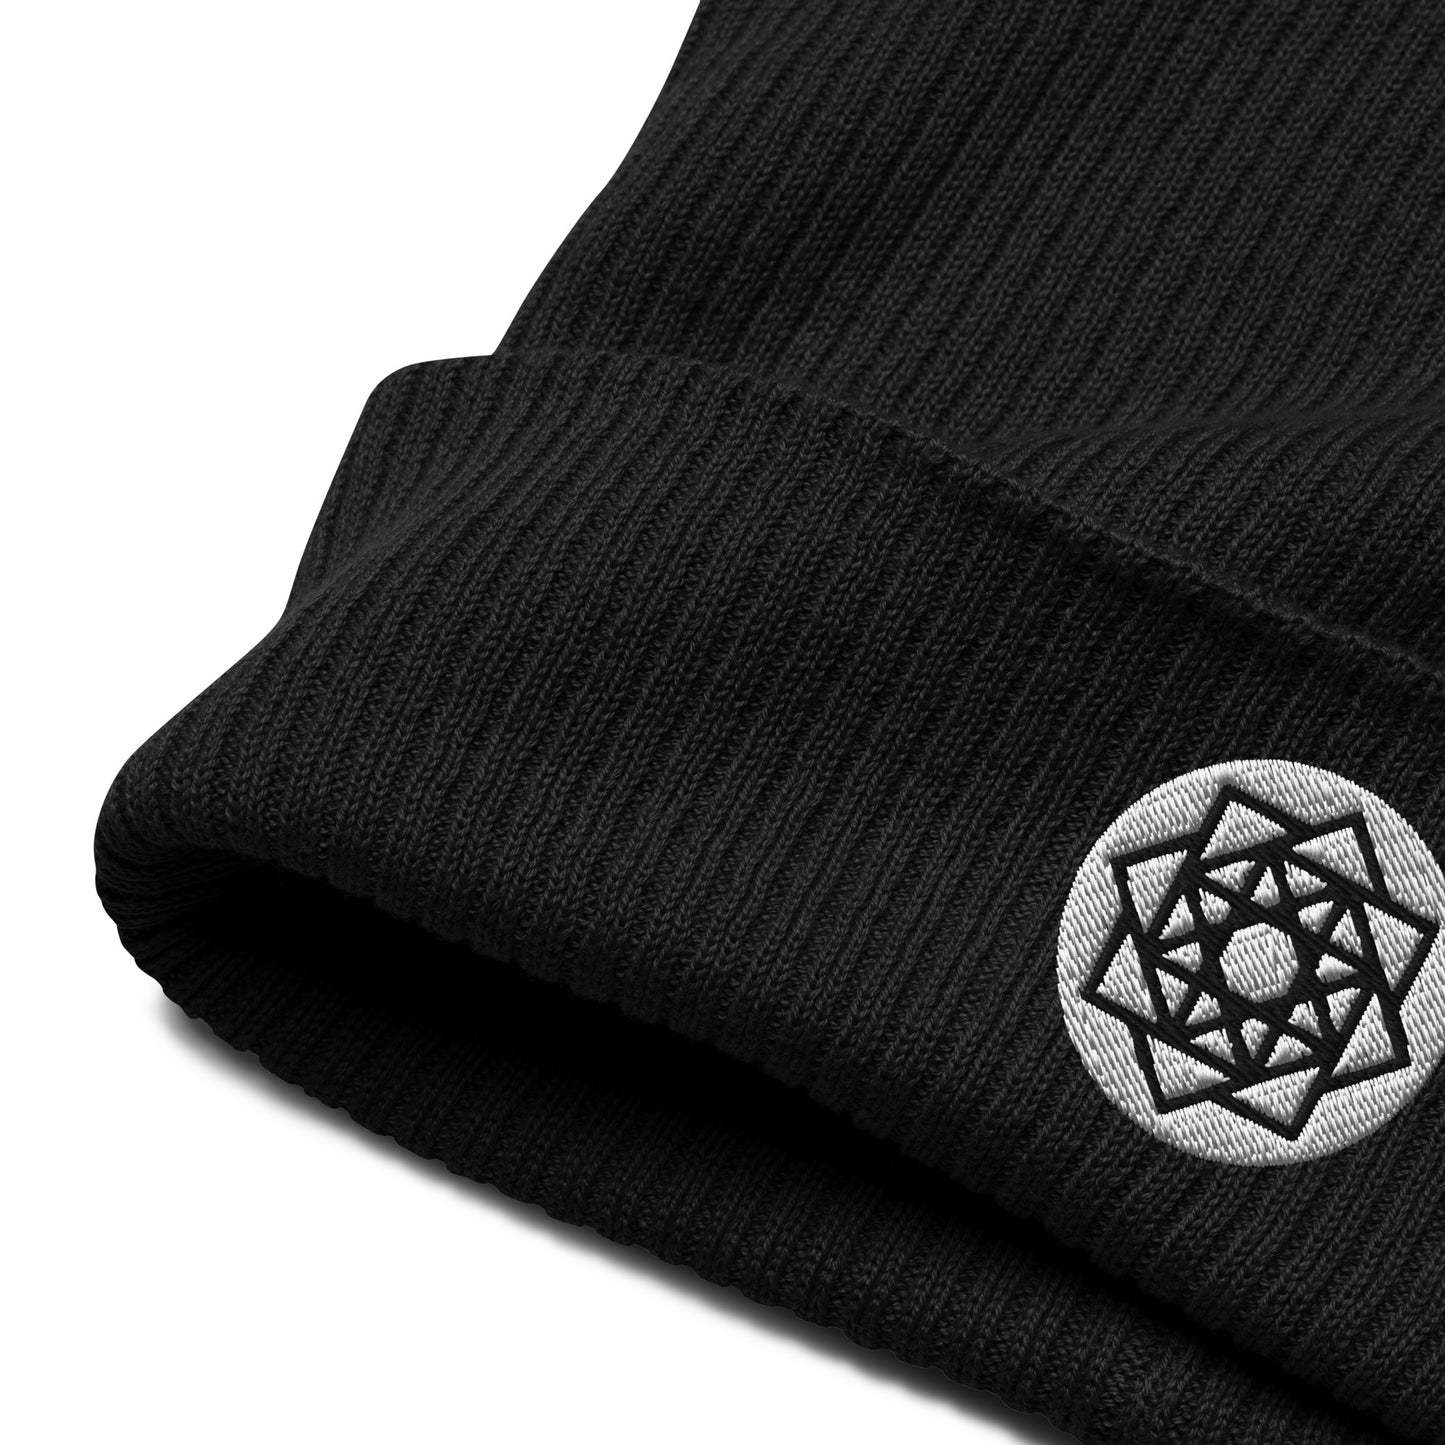 Allow me to introduce our Square Matrix Beanie in Midnight Black, a testament to cosmic order and mathematical elegance. Woven from the finest organic cotton and adorned with the precise geometry of the Square Matrix symbol, this beanie transcends mere headwear.